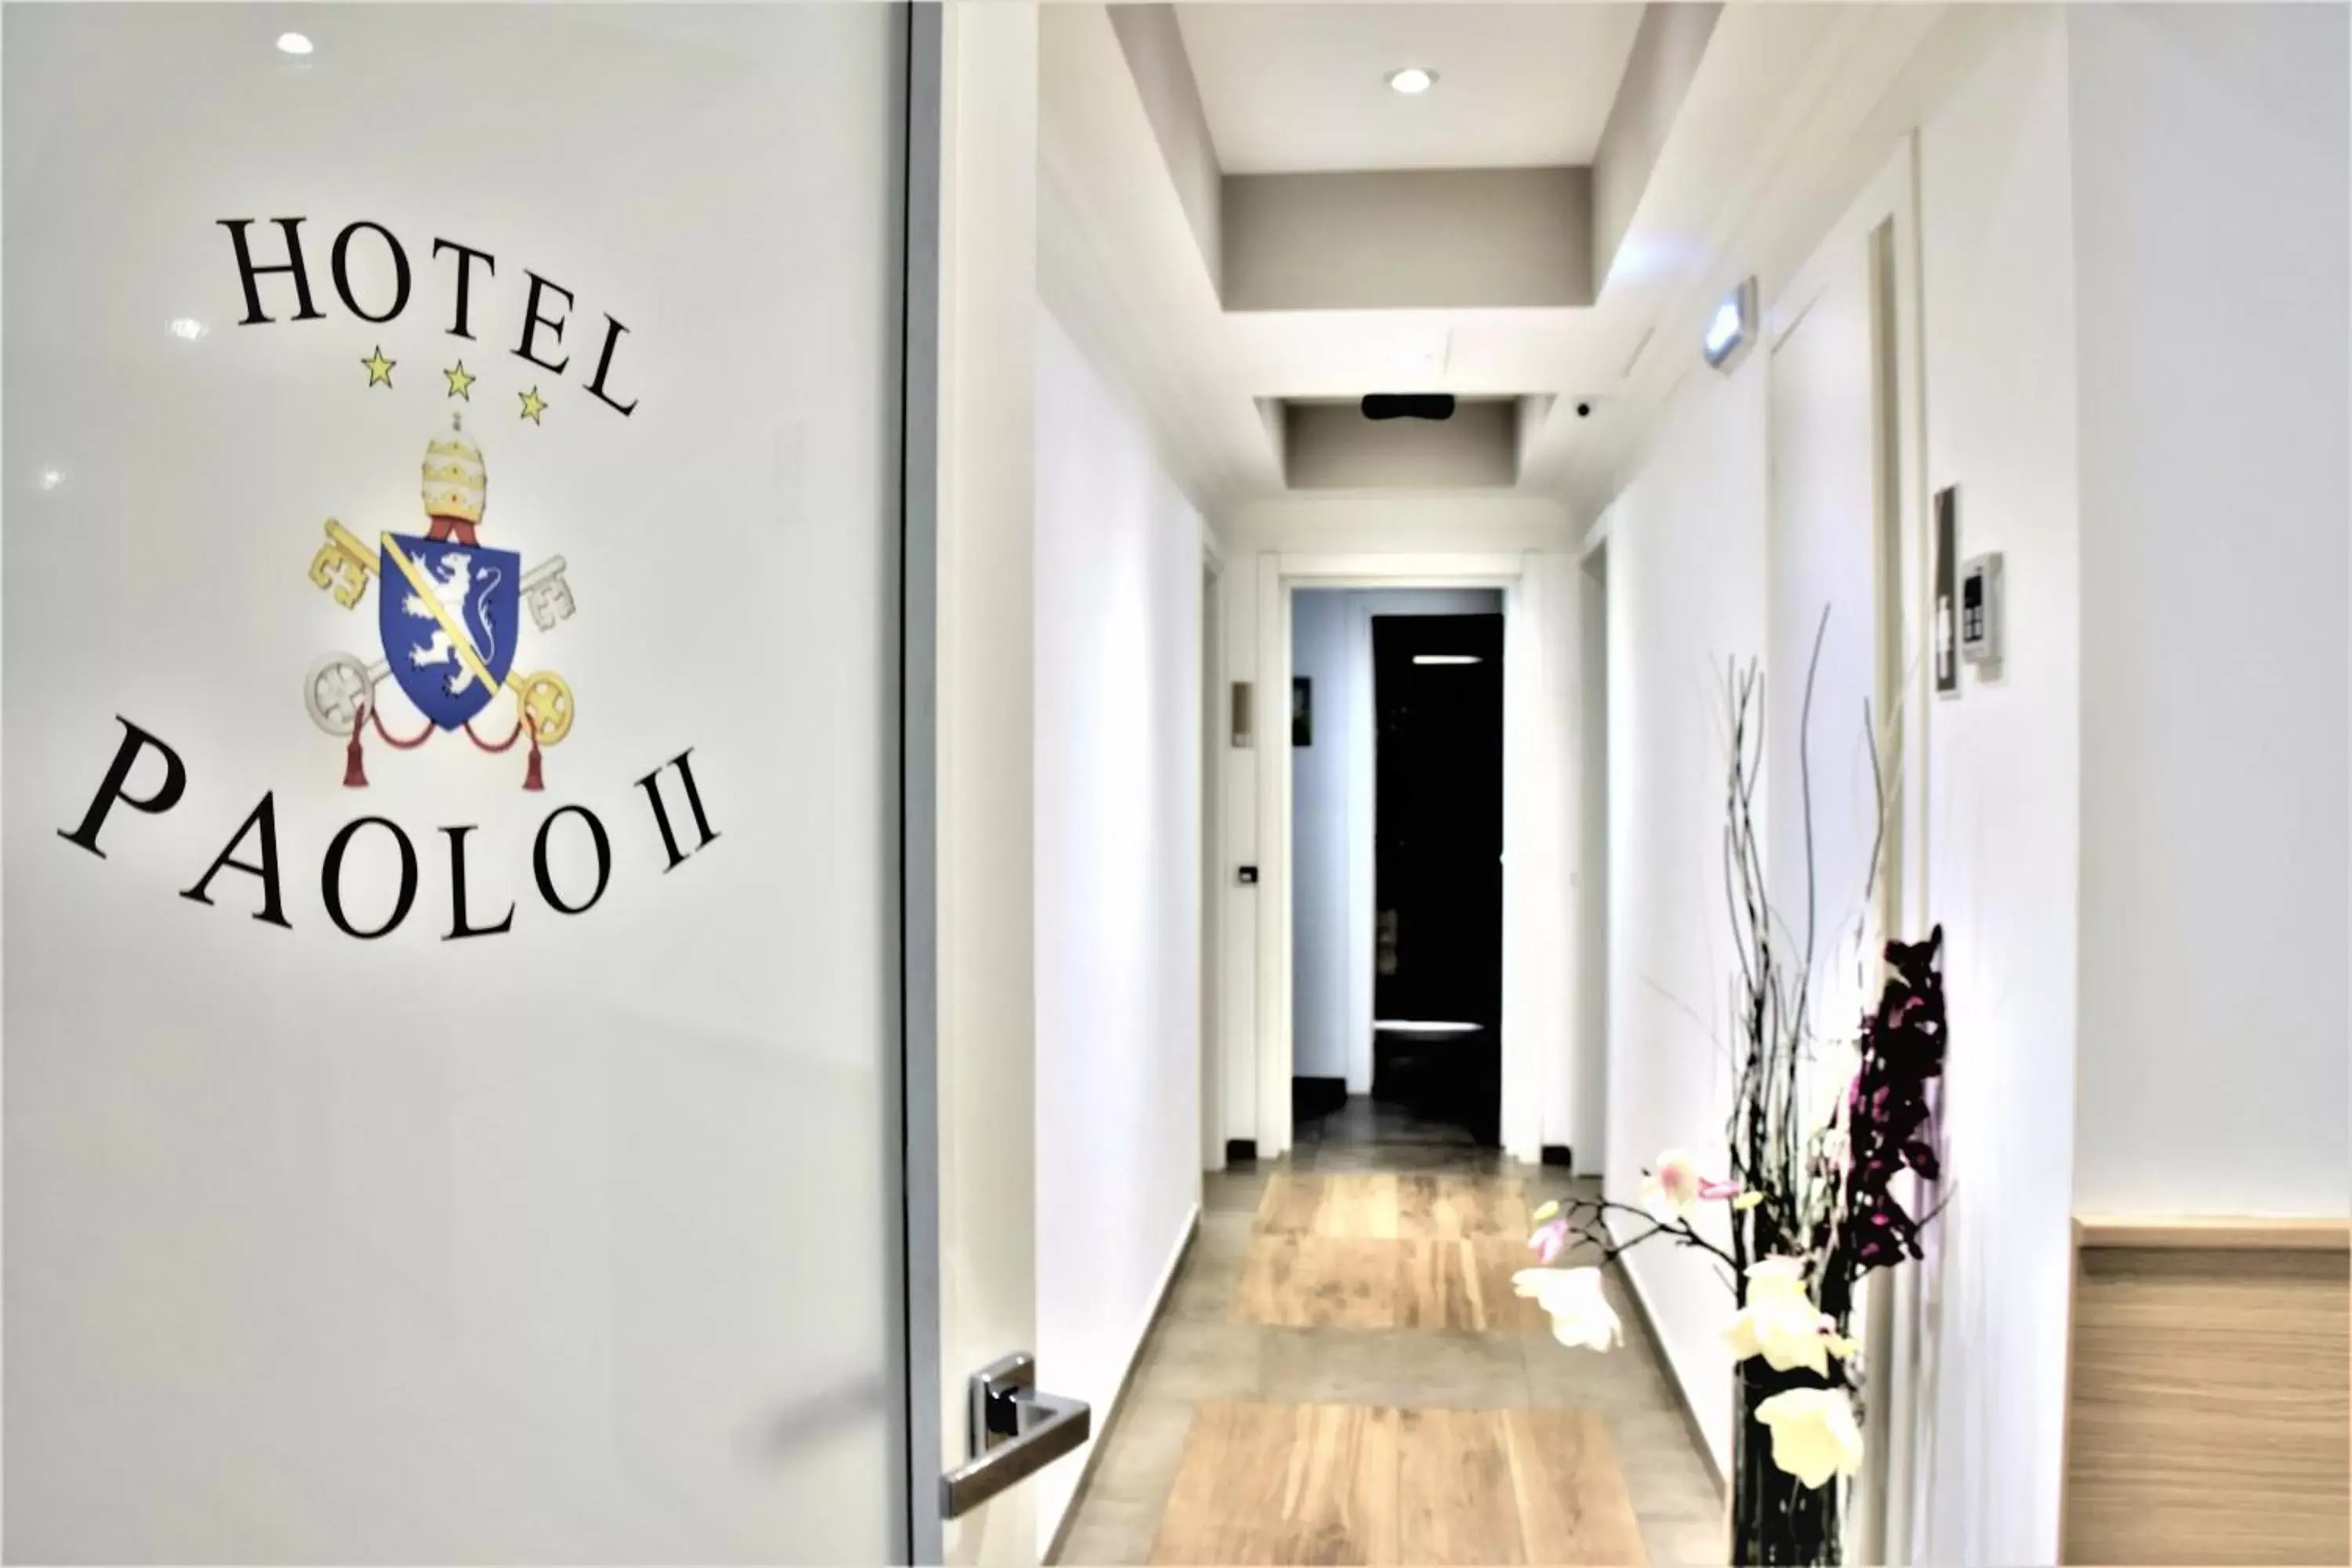 Property logo or sign in Hotel Paolo II